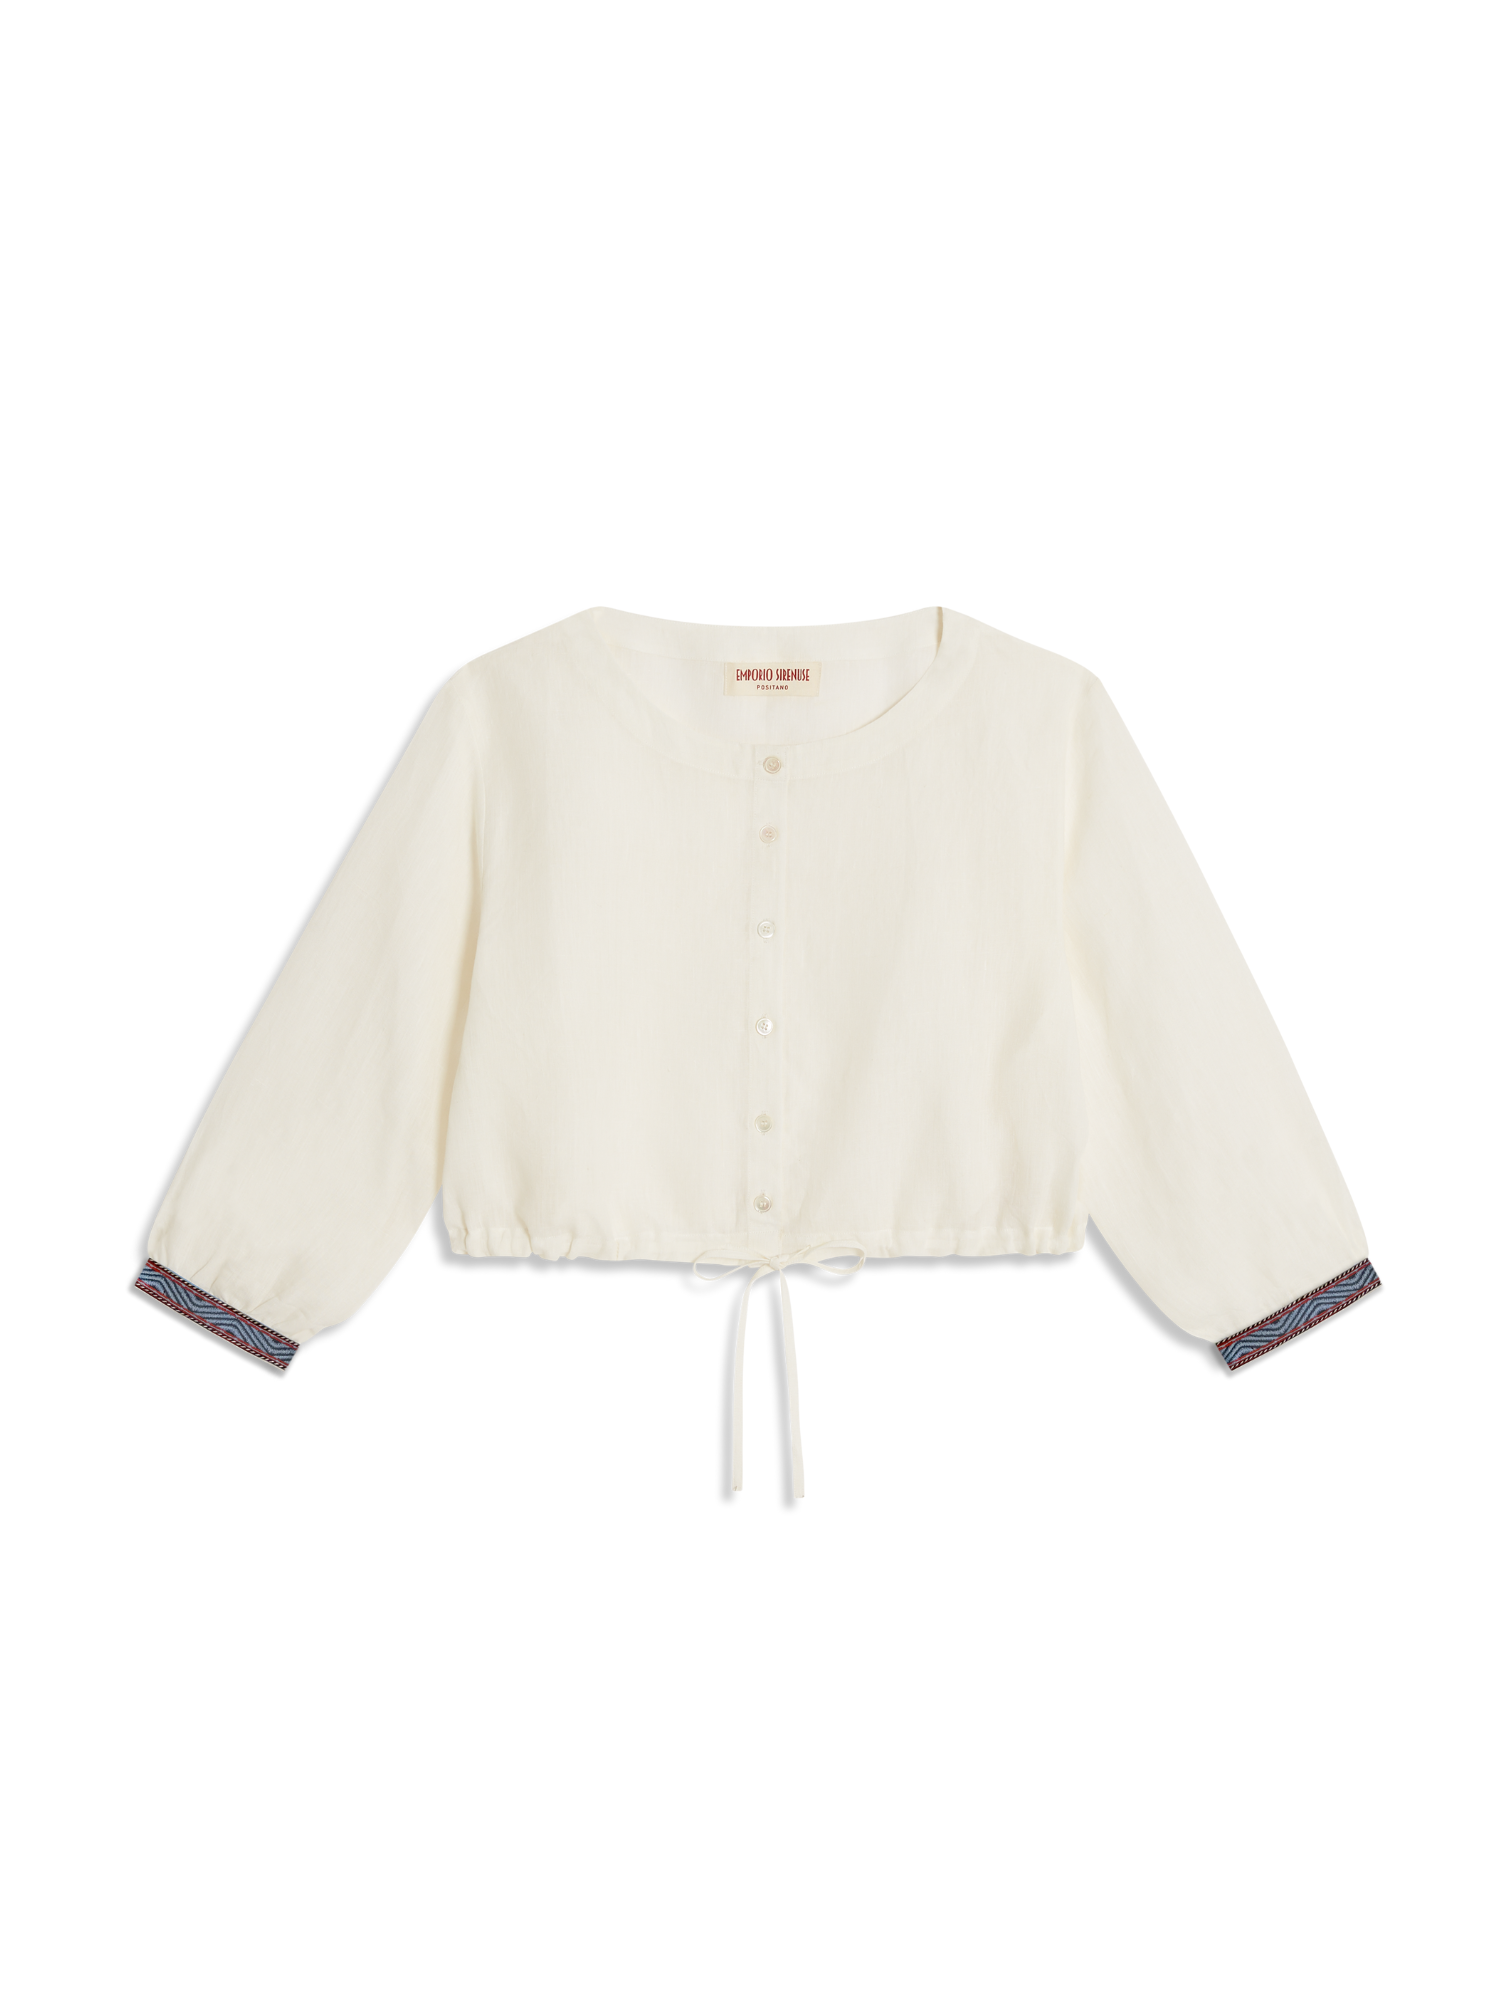 Emporio Sirenuse New Jinny Cropped Linen Blouse